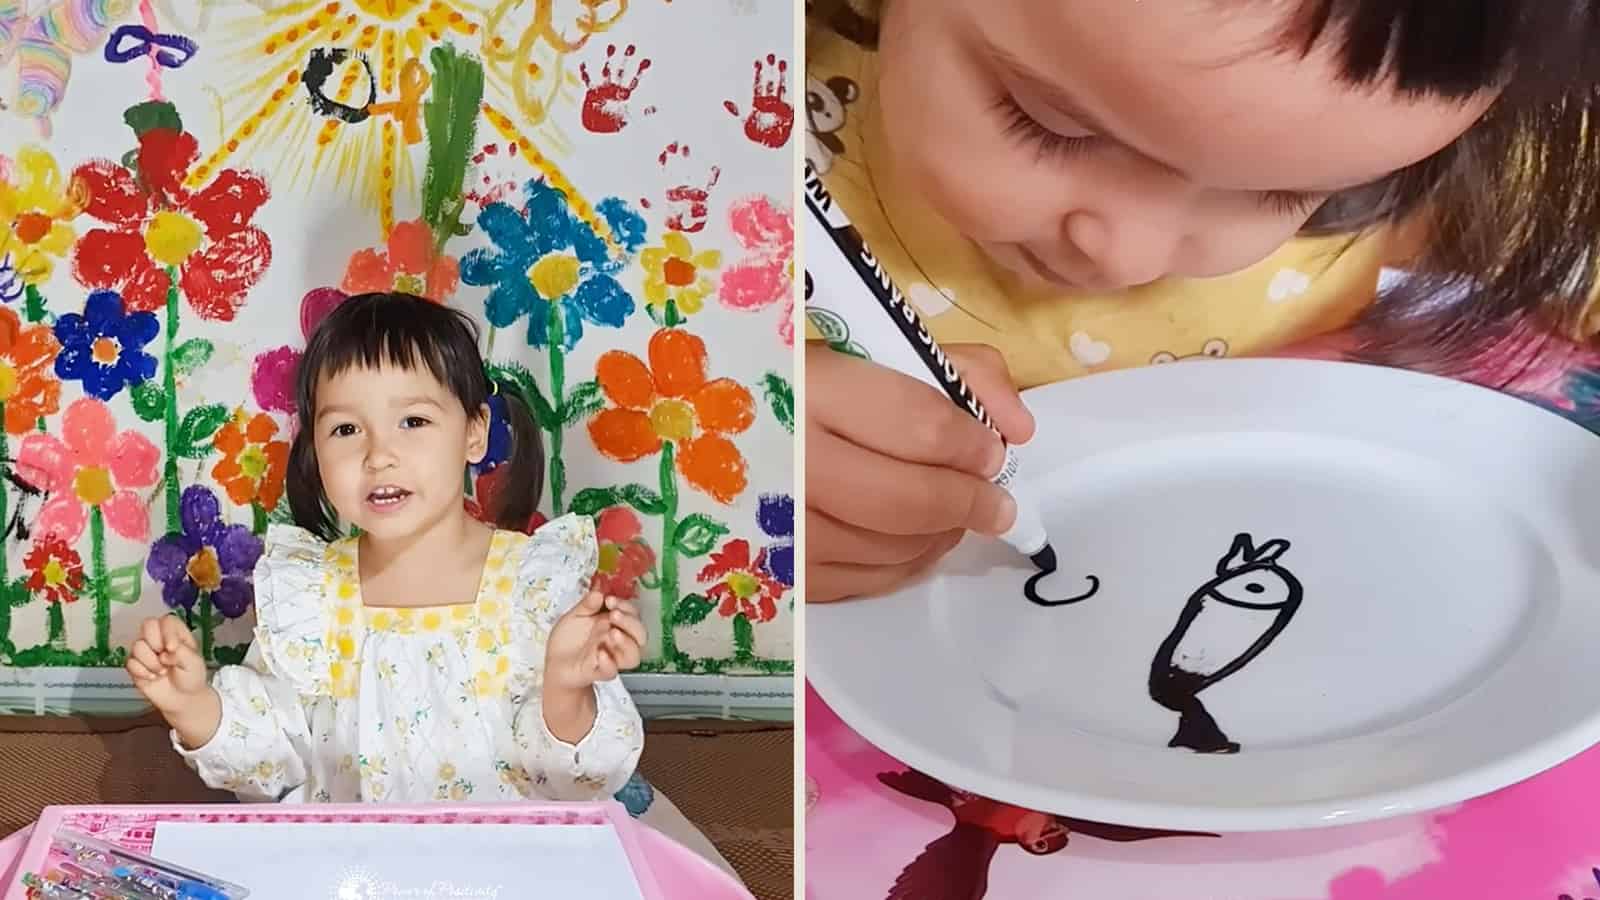 This Adorable 2-Year Old Is a Talented Aspiring Artist